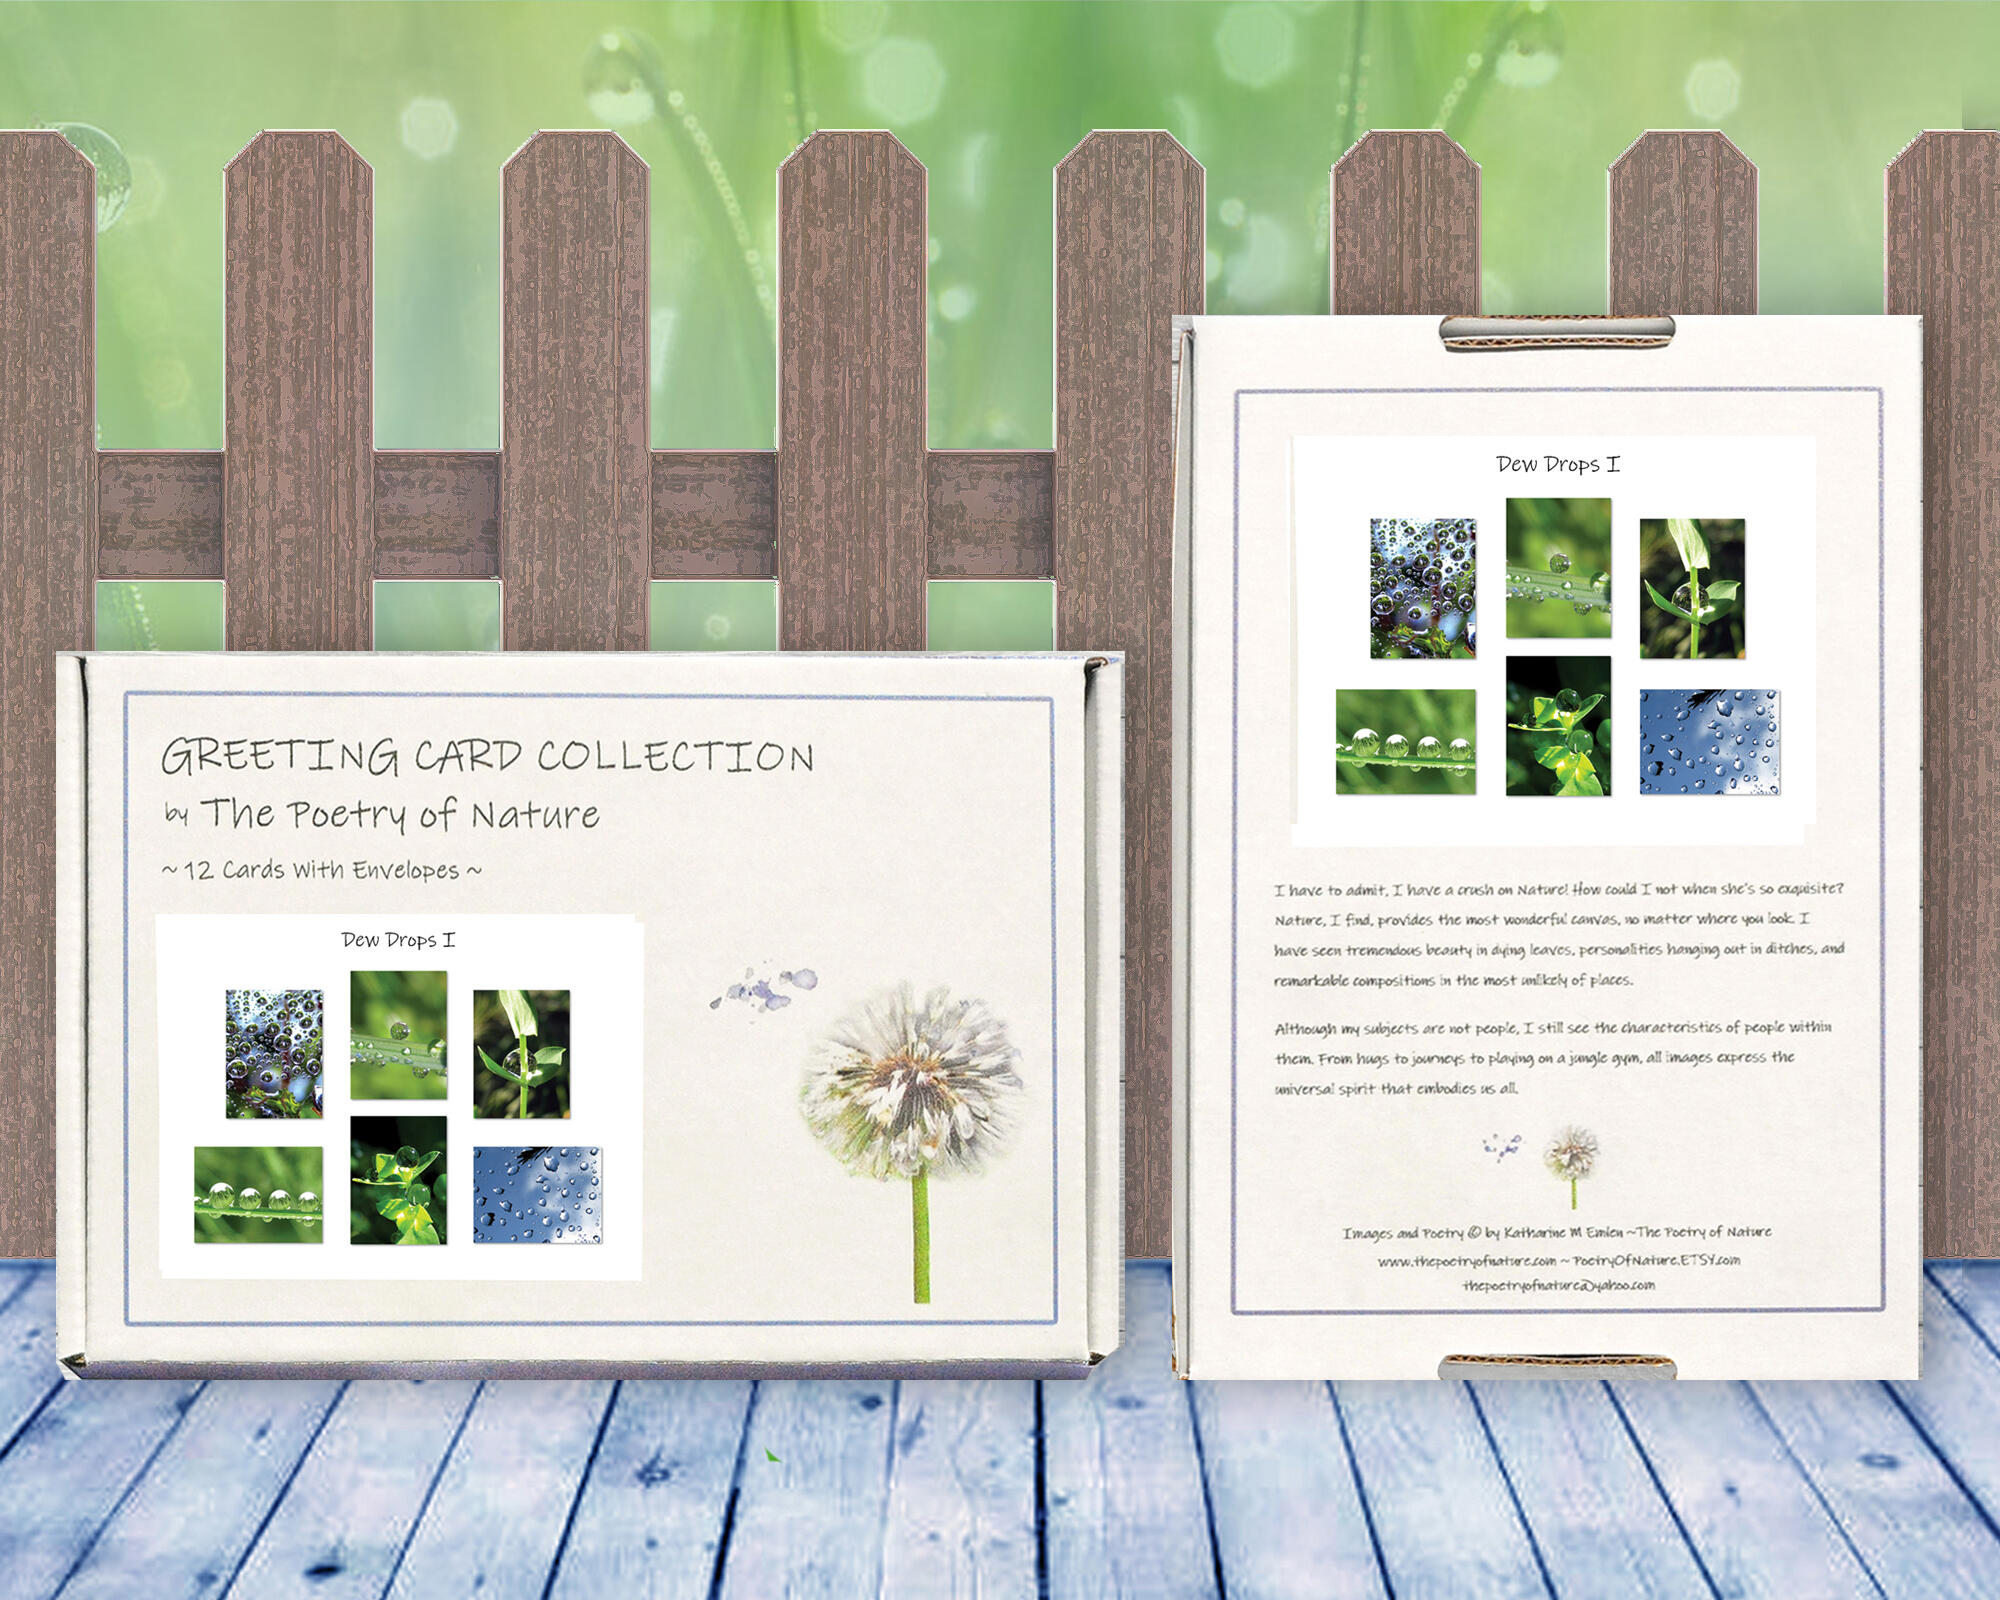 Dew Drops I - Greeting Card Collection by The Poetry of Nature